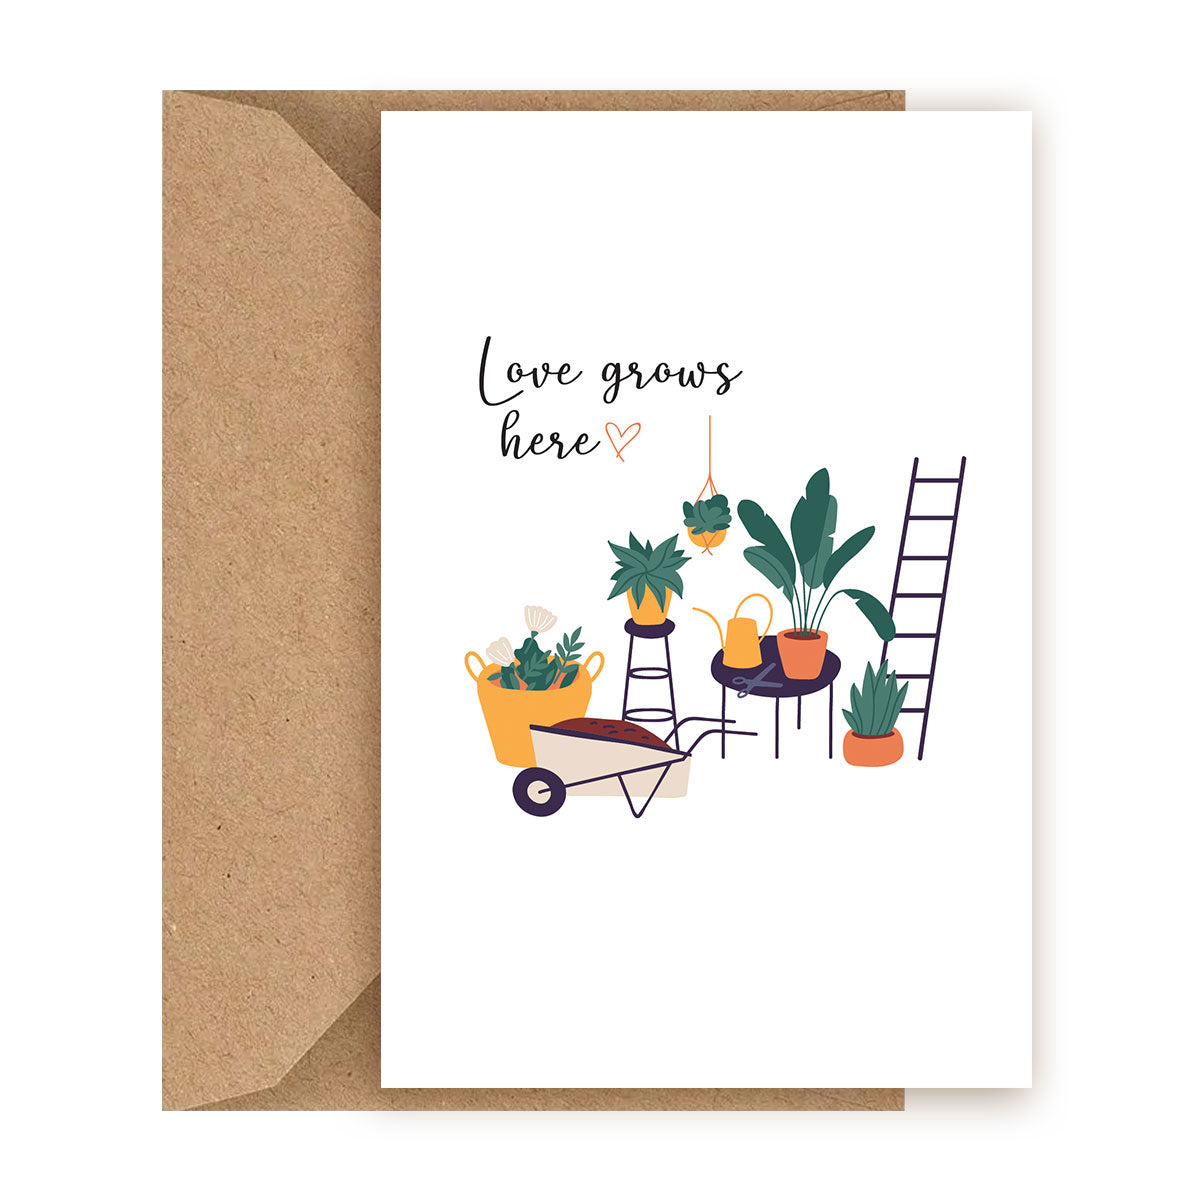 Love Grows Here Card, Succulent Happy Birthday Card for sale, Cactus Greeting Card, Succulents Greeting Card, Succulents Gift Ideas